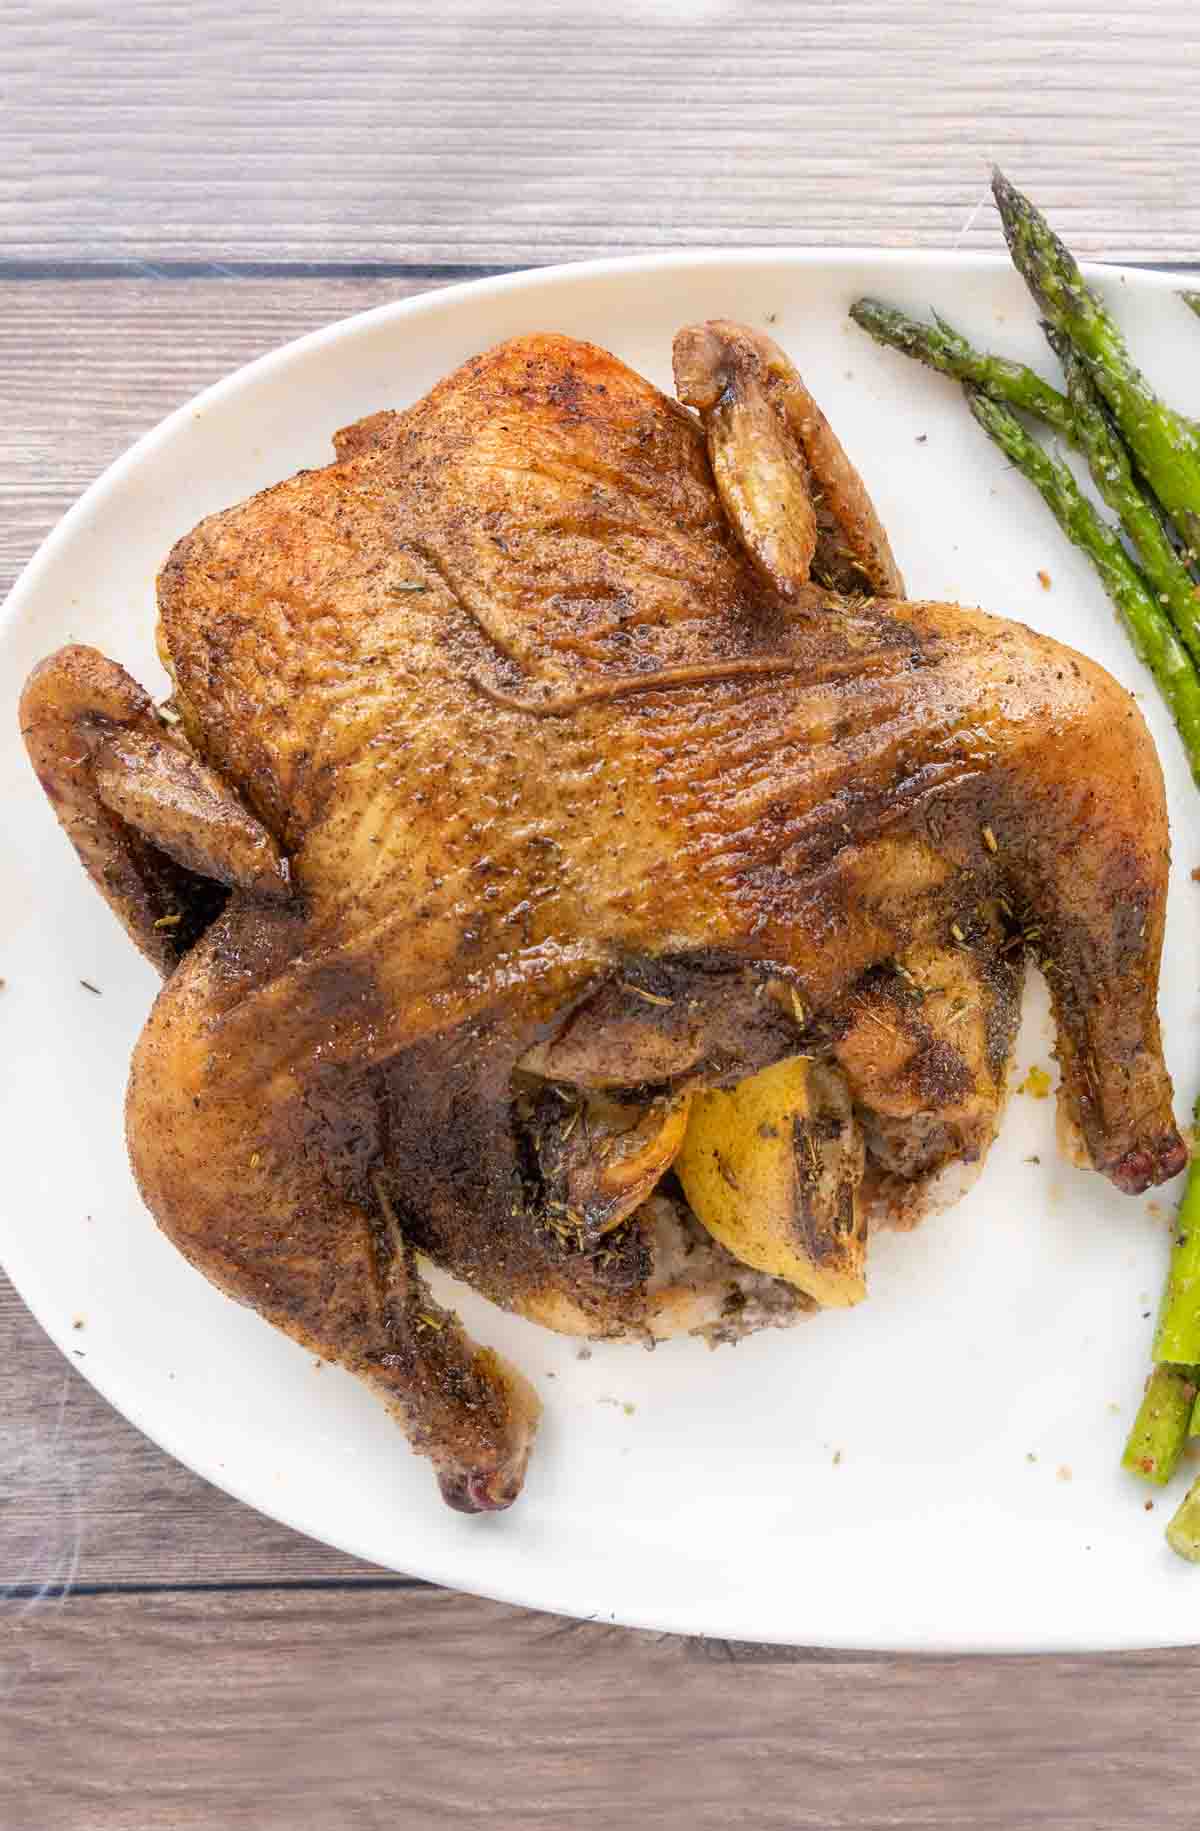 Roasted Cornish hen with asparagus on a white platter.